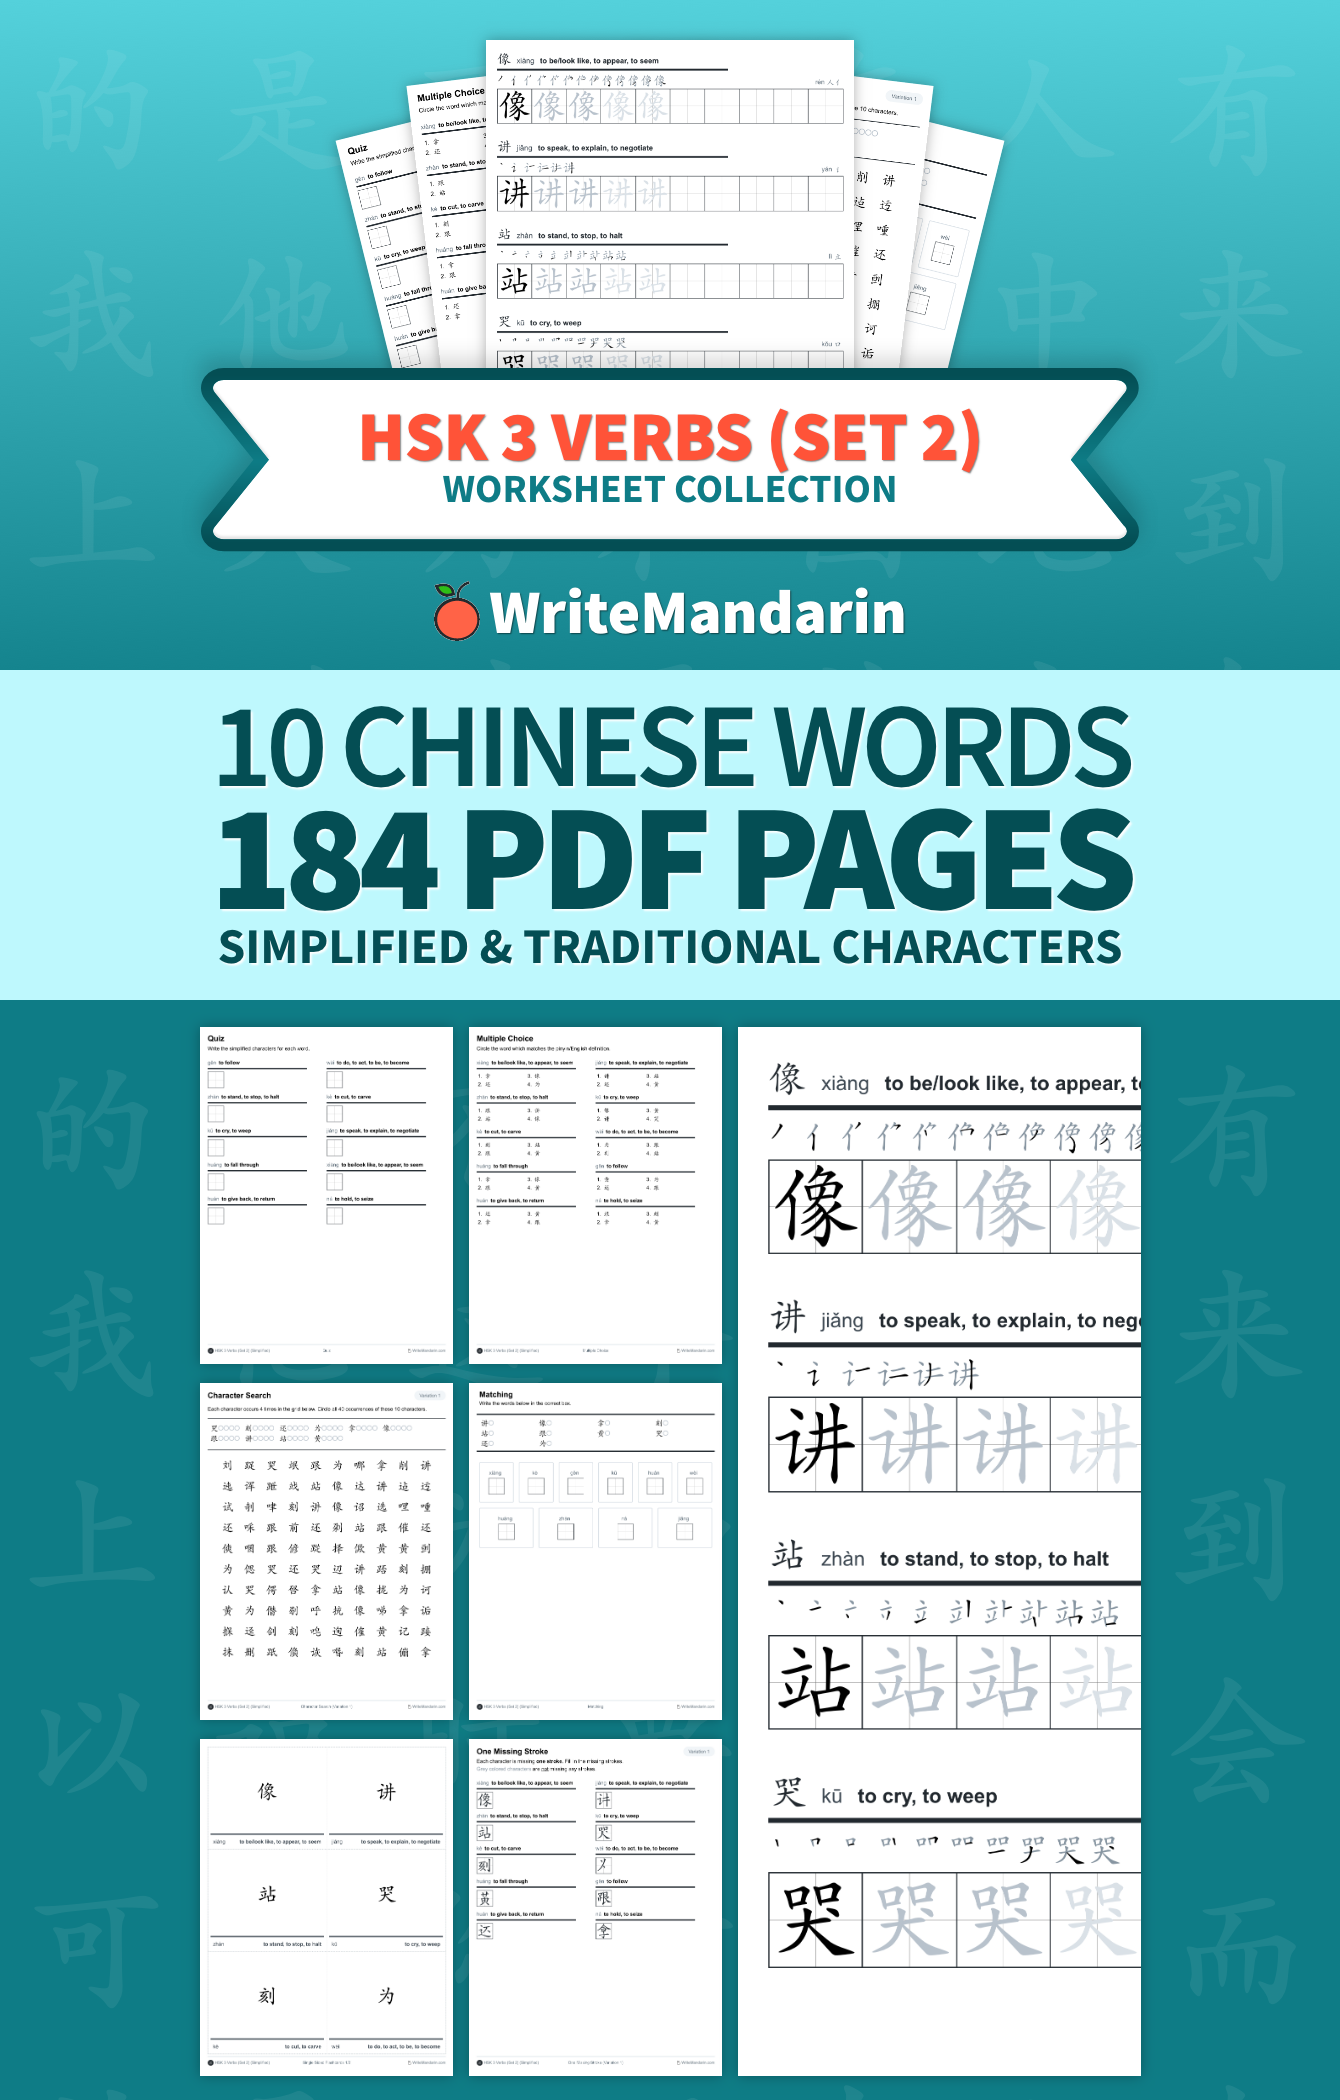 Preview image of HSK 3 Verbs (Set 2) worksheet collection